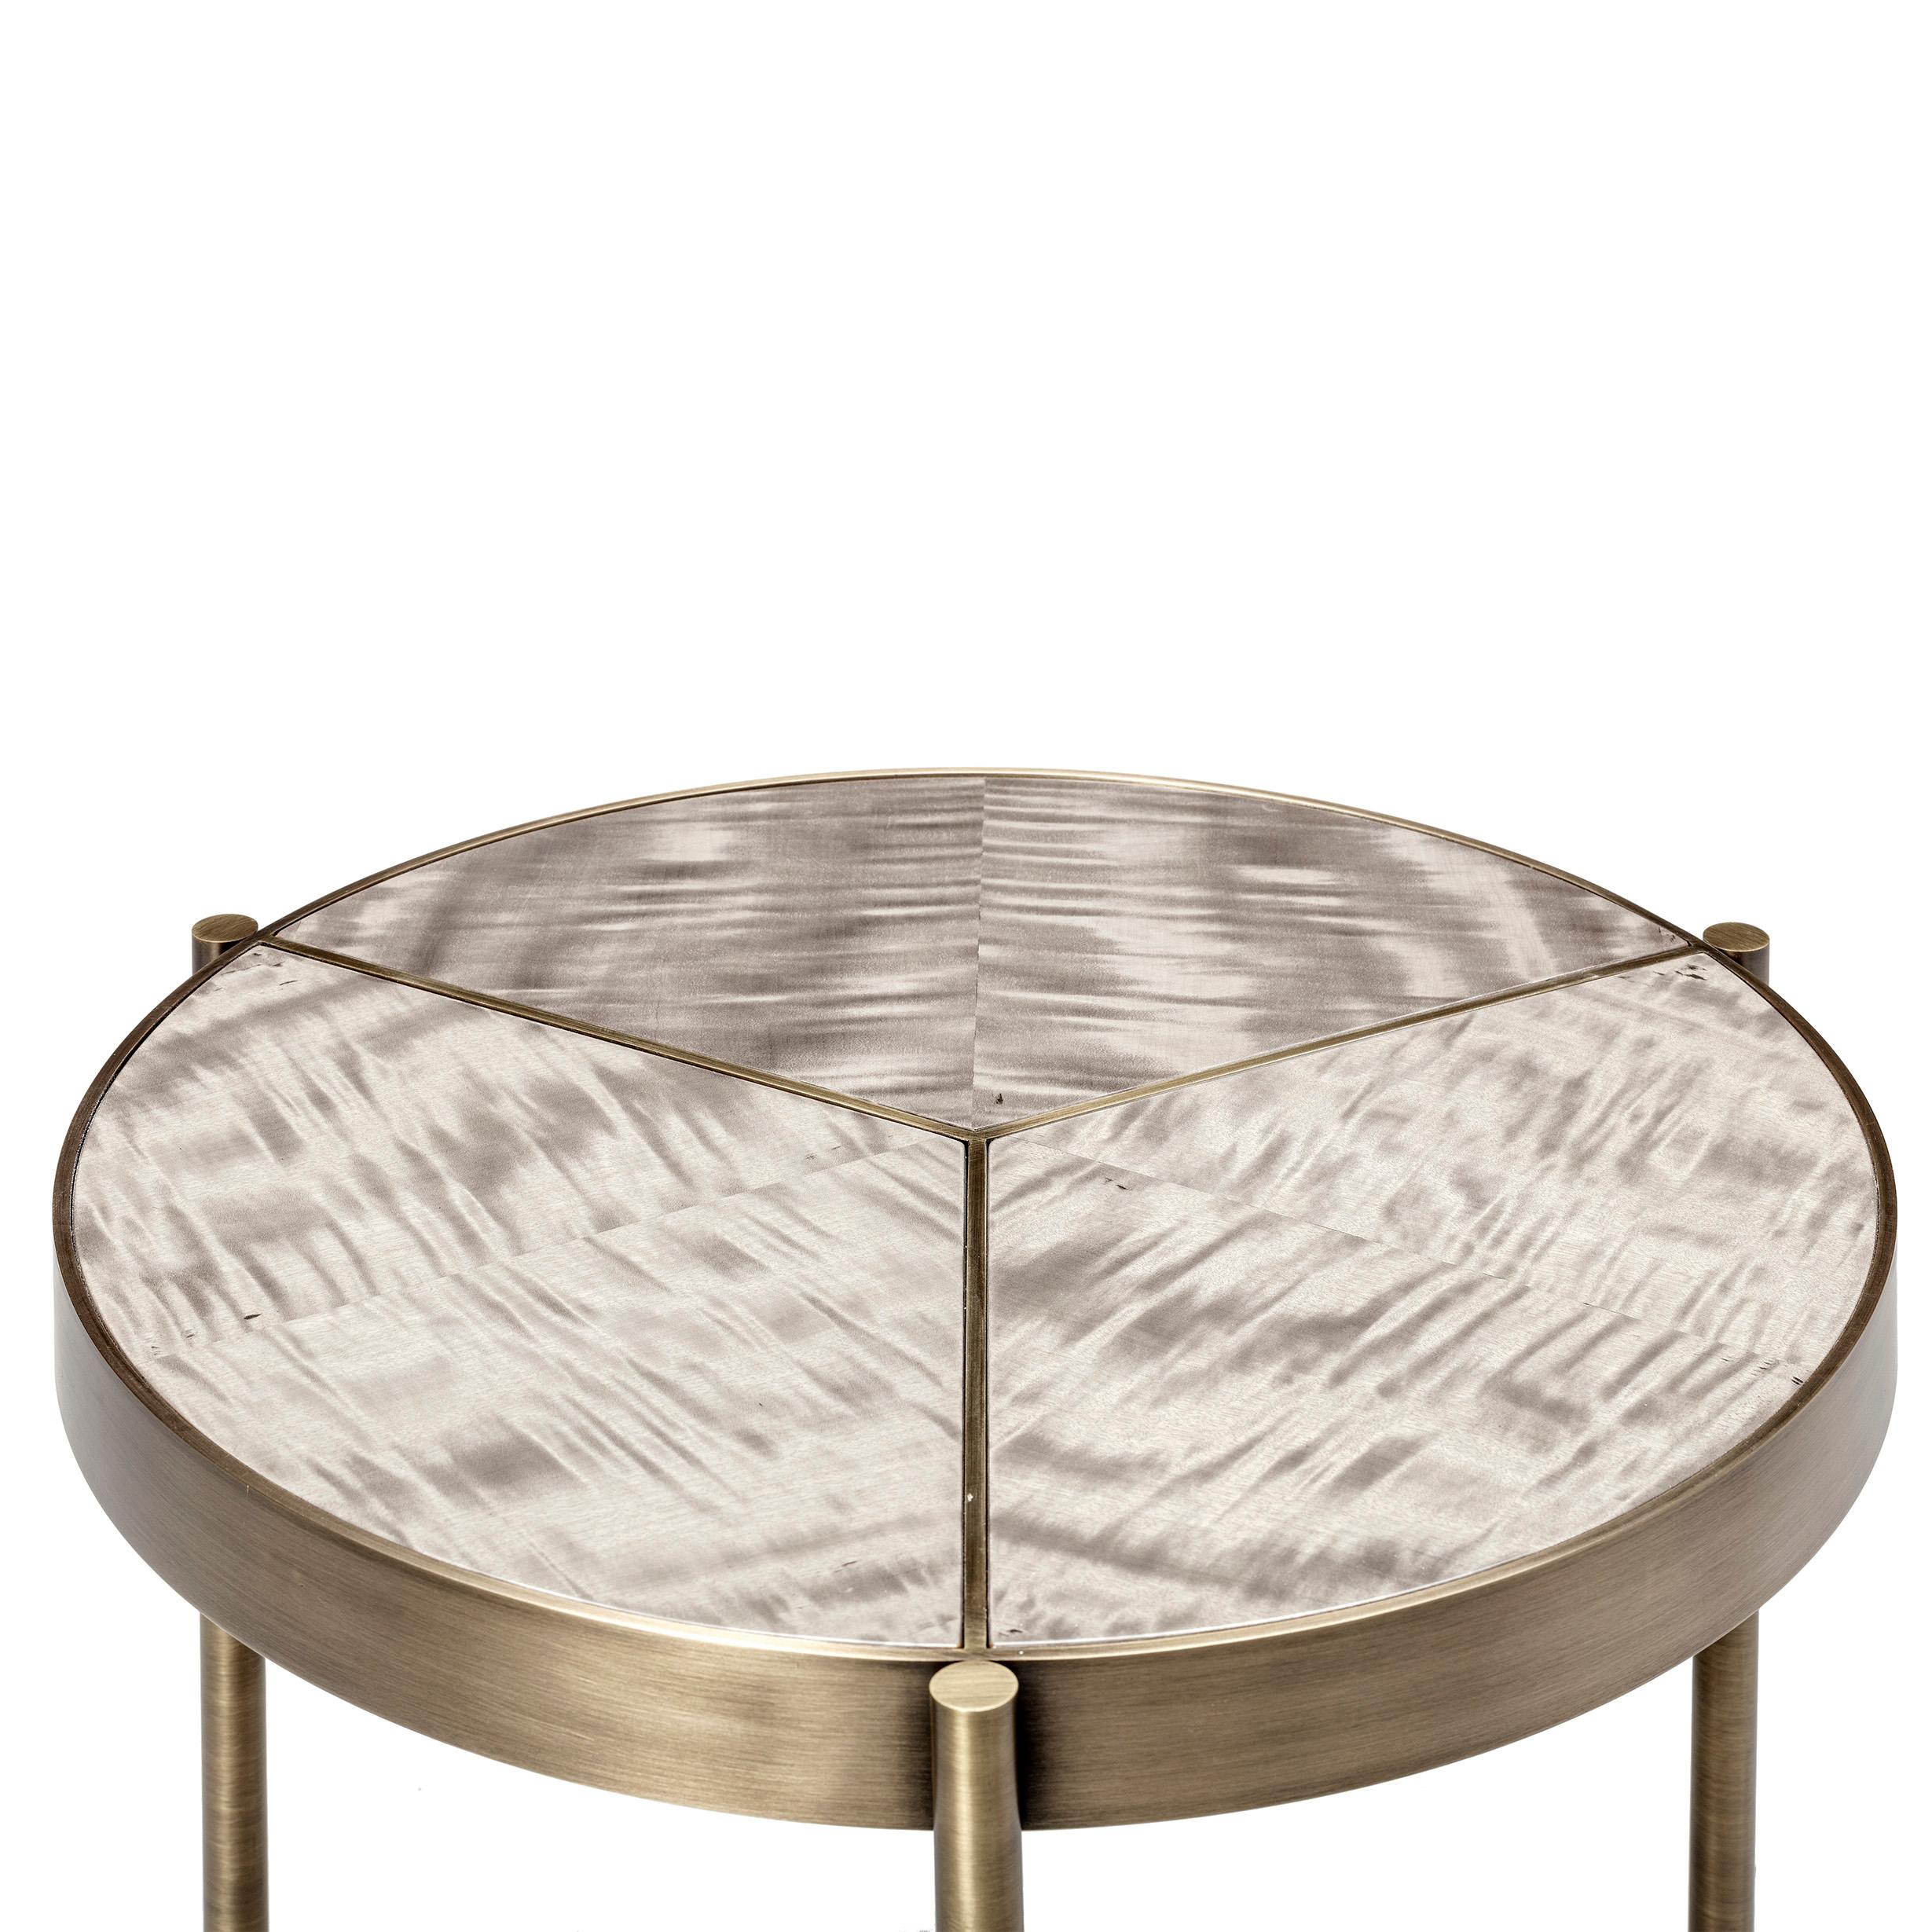 Ray Side Table, in Bronze and Marron VITA Marble Top, Handmade by Duistt

Ray side table is a combination of elegance and versatility. its three delicate rays confine division to the tabletop, allowing customization and creativity with our range of